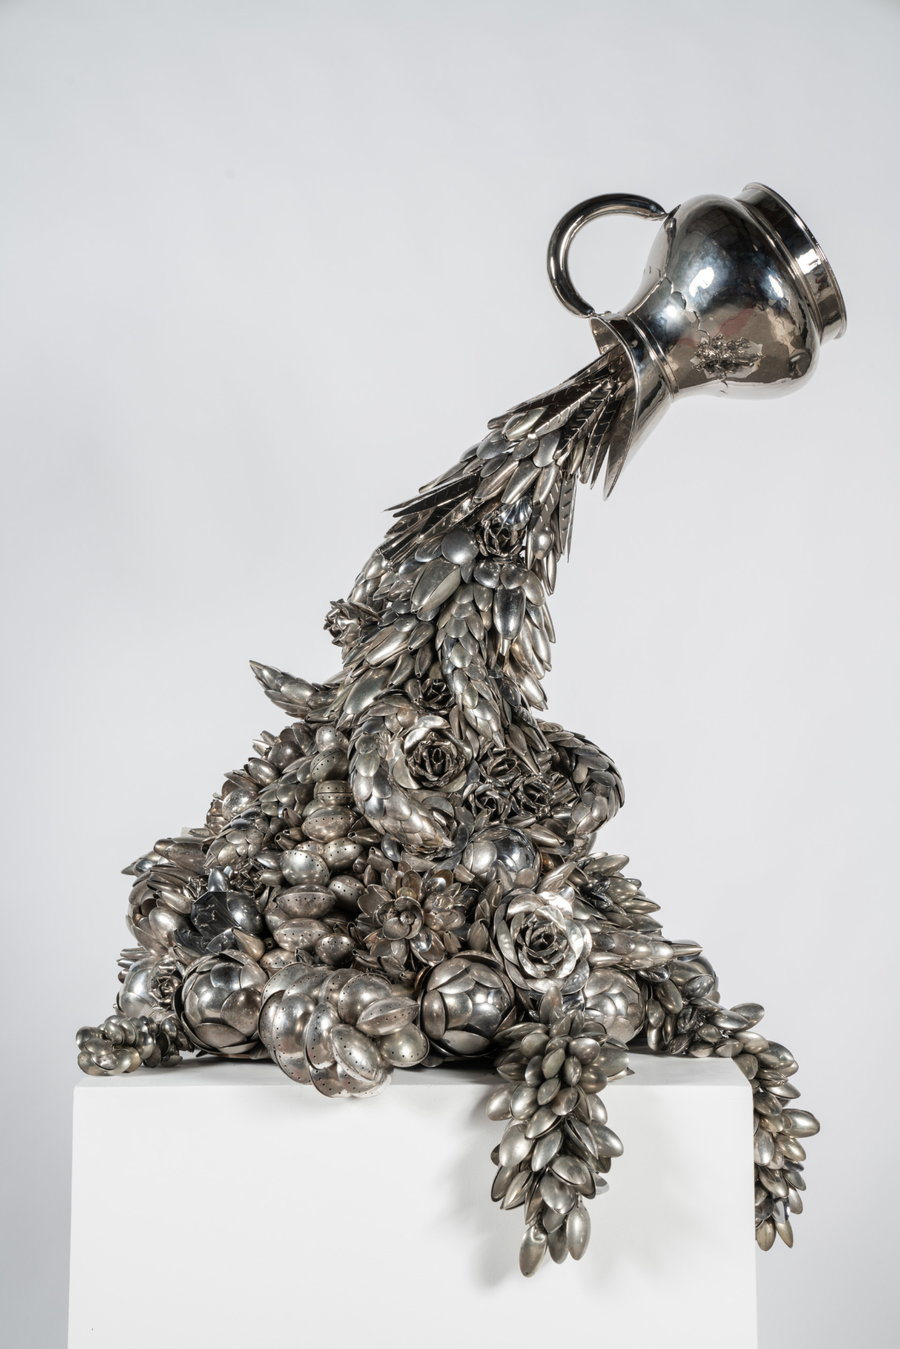 Upcycled silver pitcher by artist Ann Carrington.